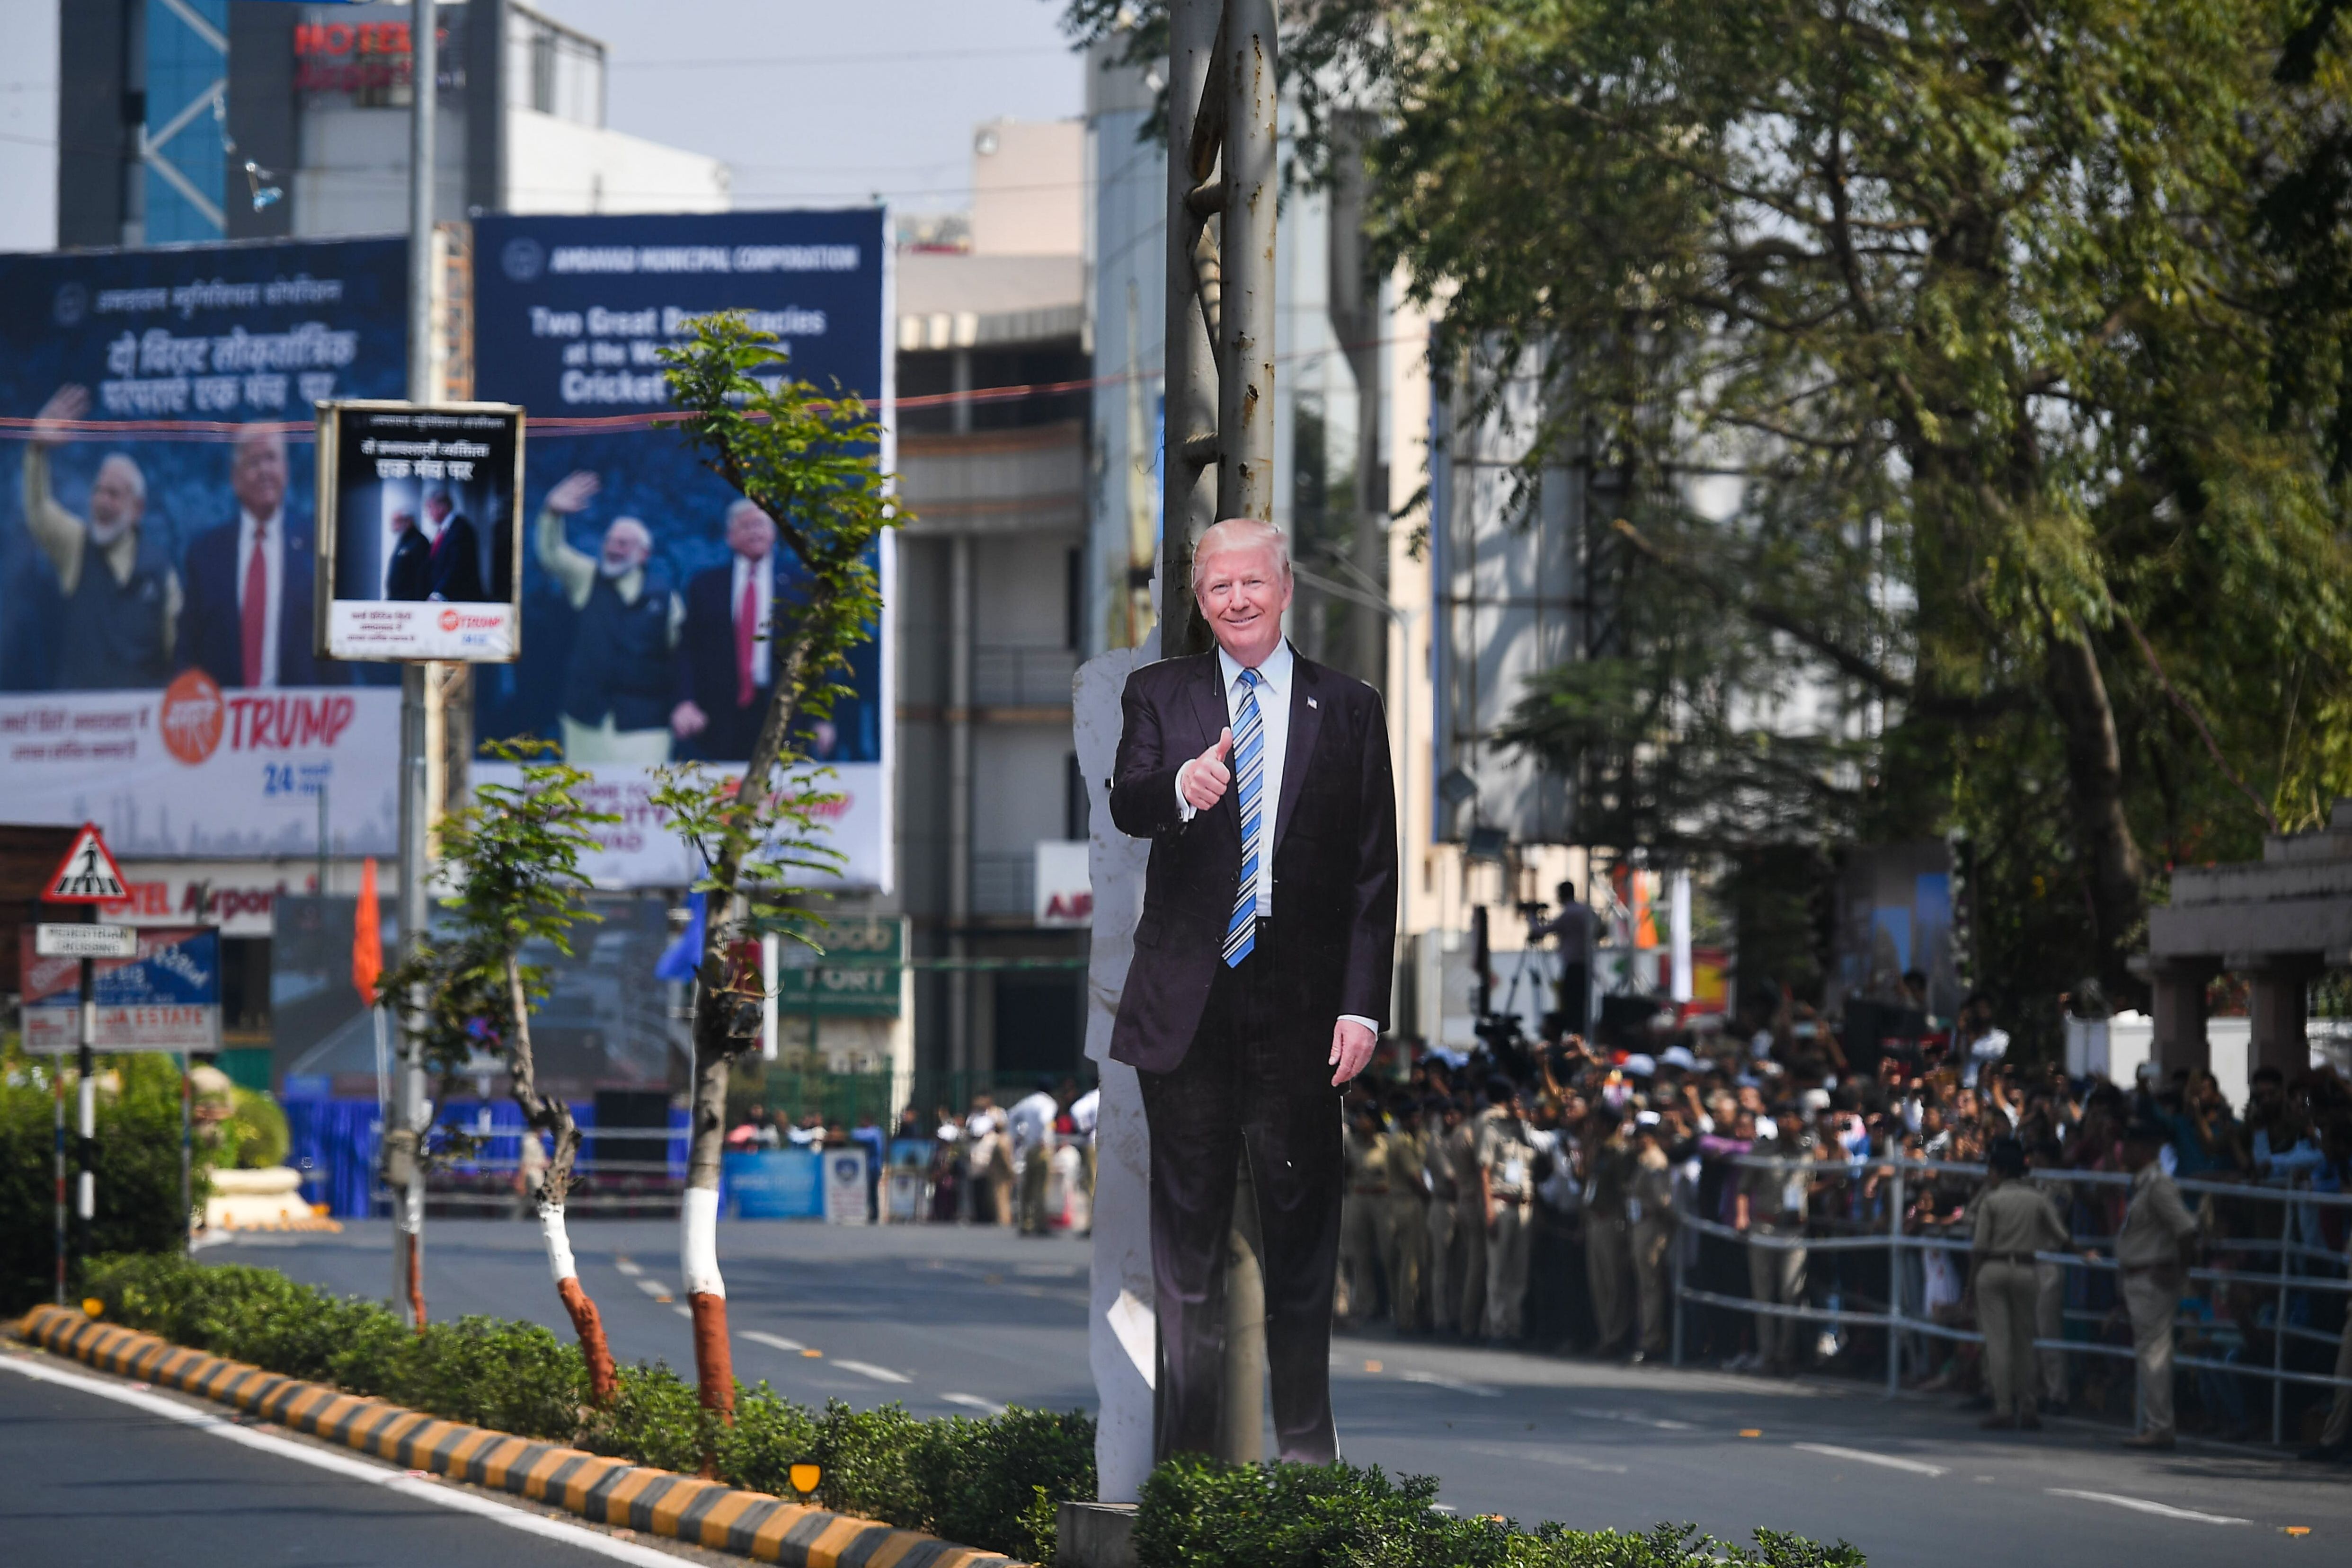  A cutout of US President Donald Trump is seen as people wait beside a street to catch a glimpse of his motorcade in Ahmedabad on February 24